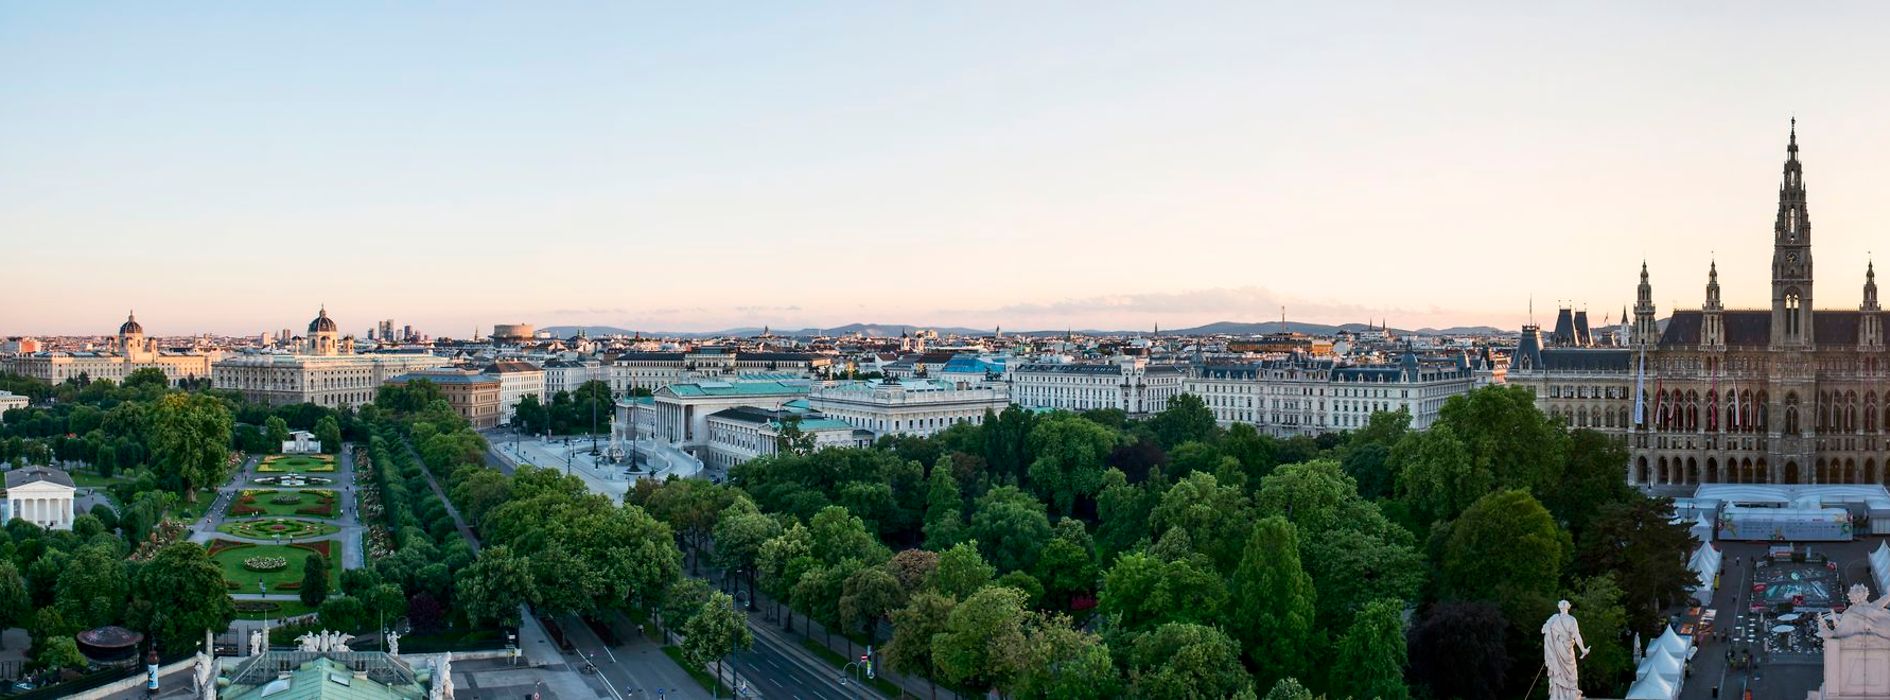 View of the Ringstrasse from the roof of the Burgtheater